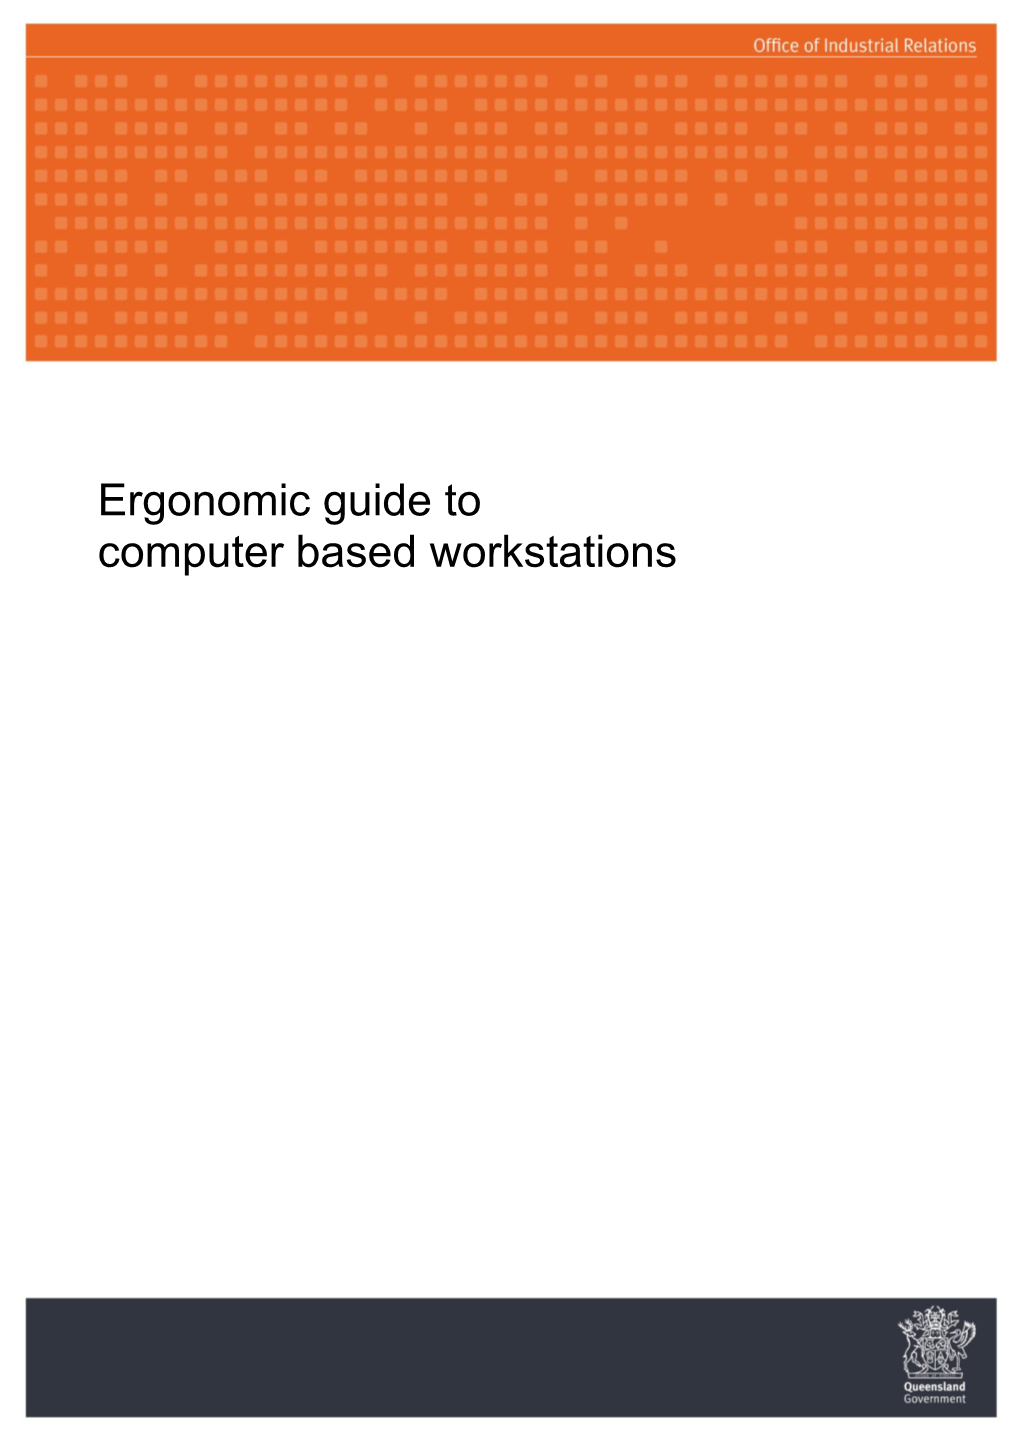 Ergonomic Guide to Computer Based Workstations